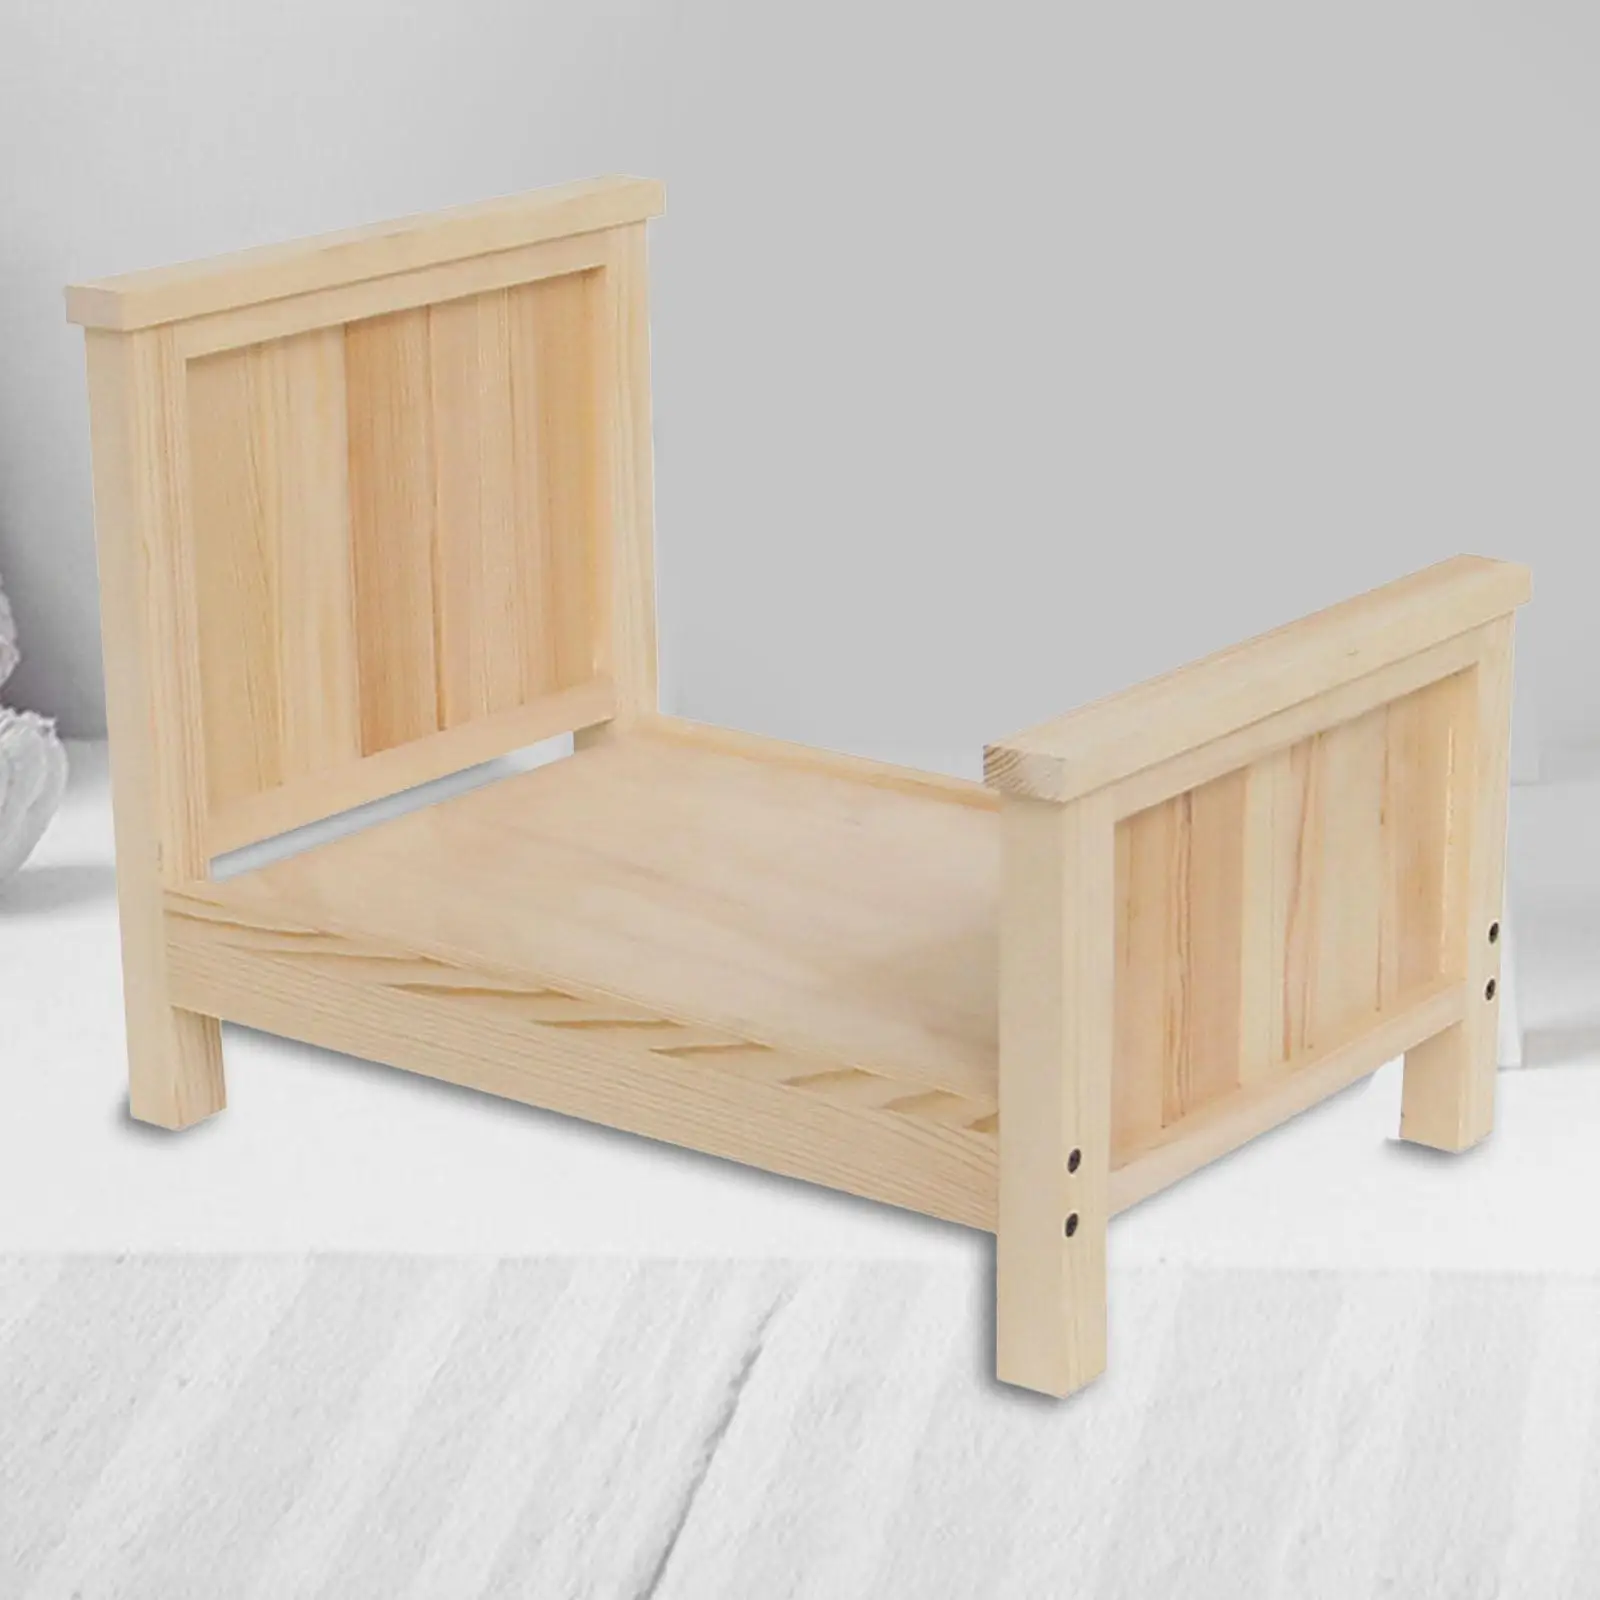 Wooden Baby Photoshoot Props Decor Mini Bed Fashion Modern Fashion Photography Background Studio Props Furniture Cute